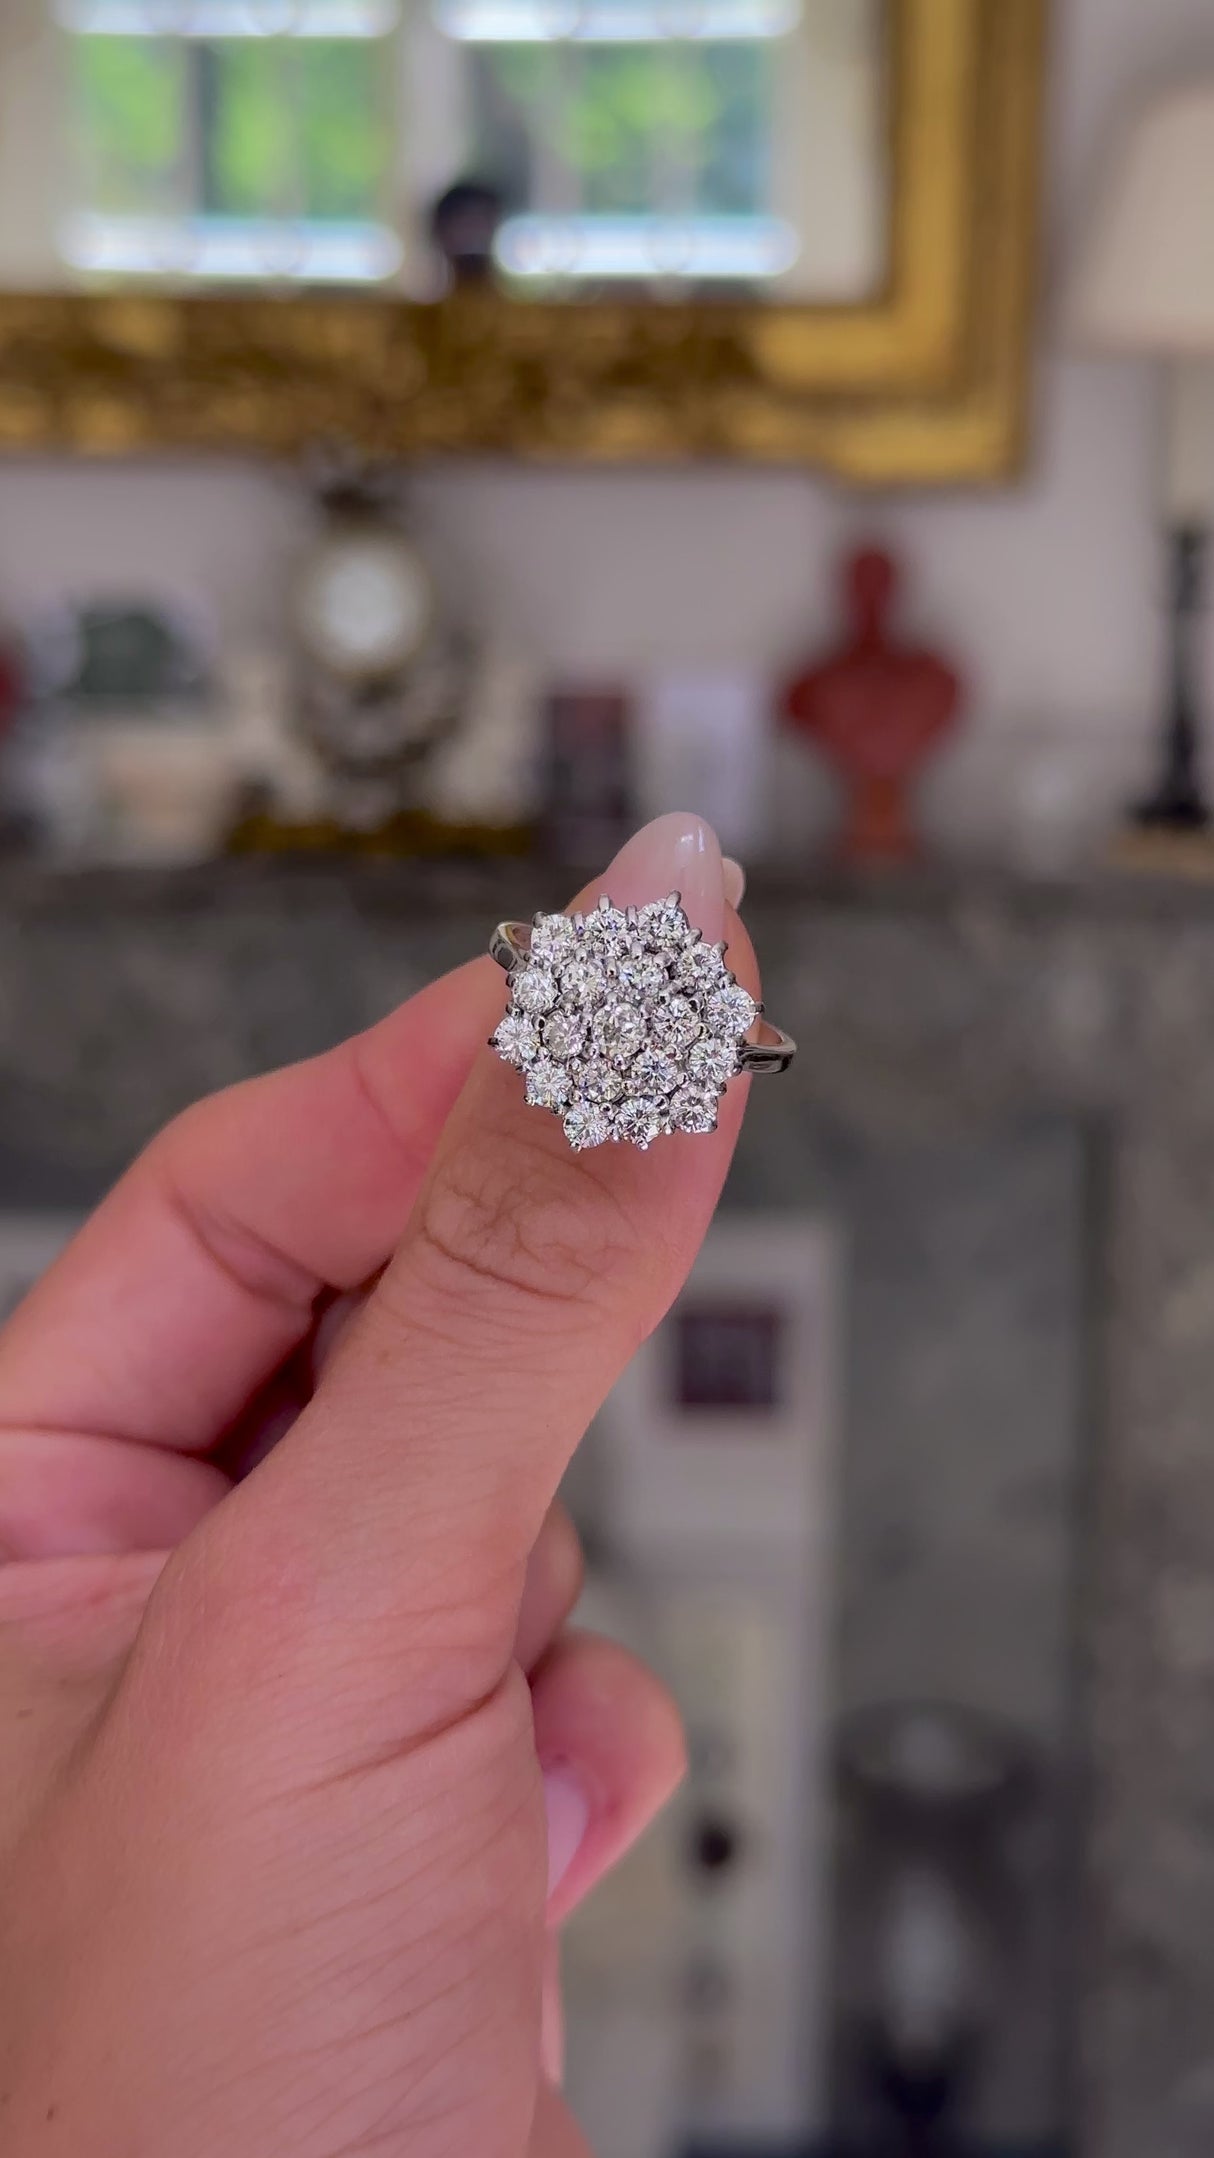 Vintage, large diamond cluster ring held in fingers and moved around to give perspective.